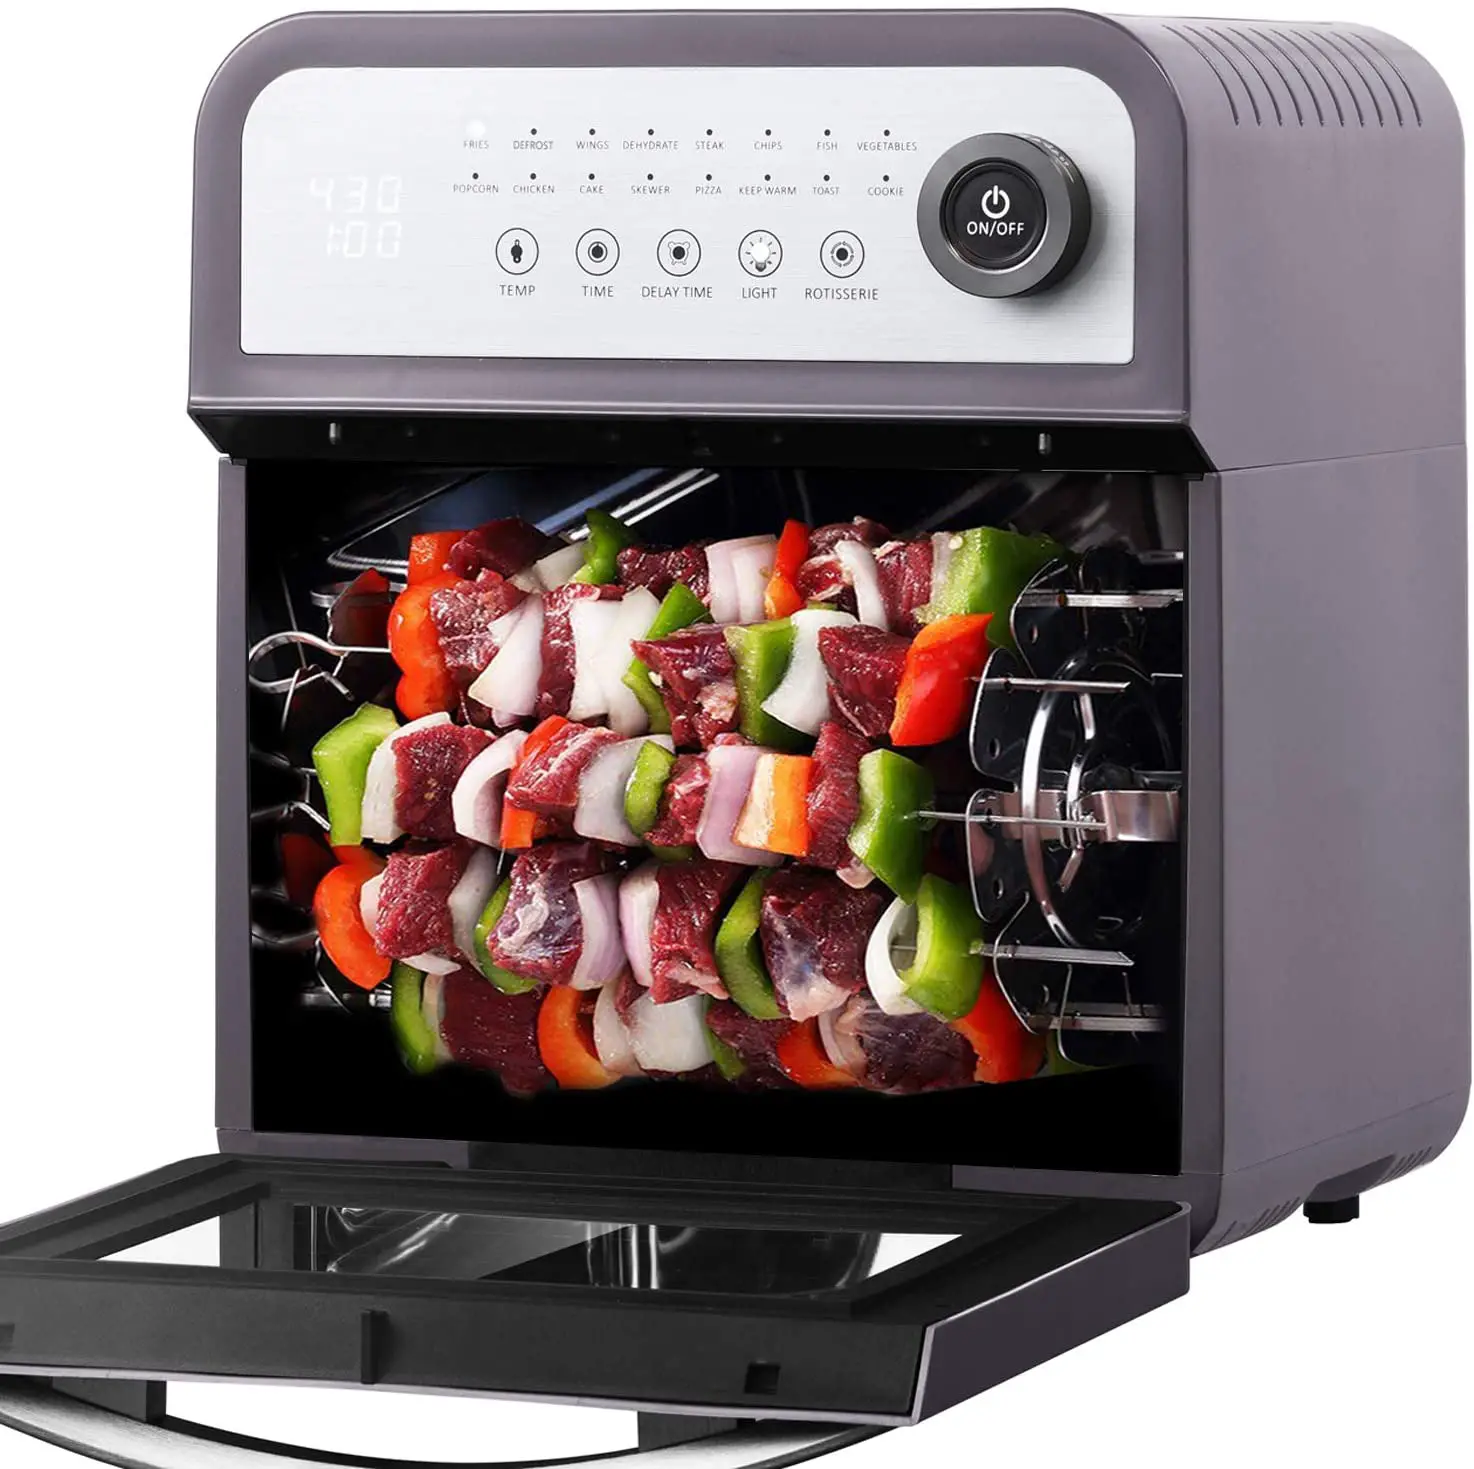 Geek Chef Air Fryer Oven 12 Quart Large Capacity with ...